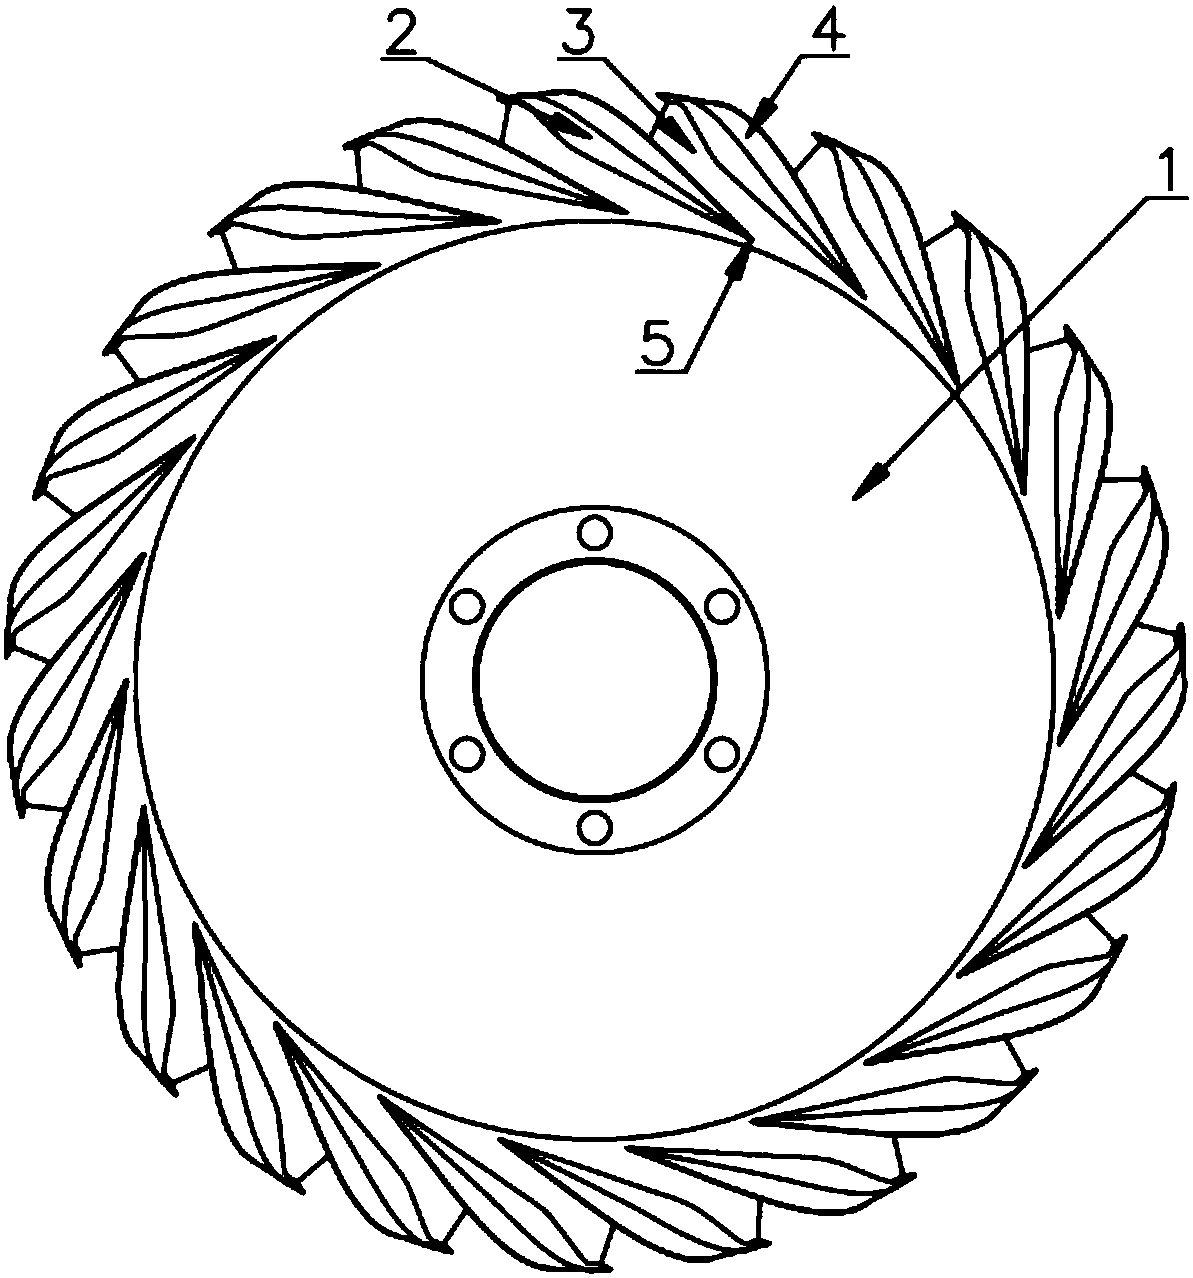 Centrifugal compressor diffusor structure with blades being integrated with case and hub